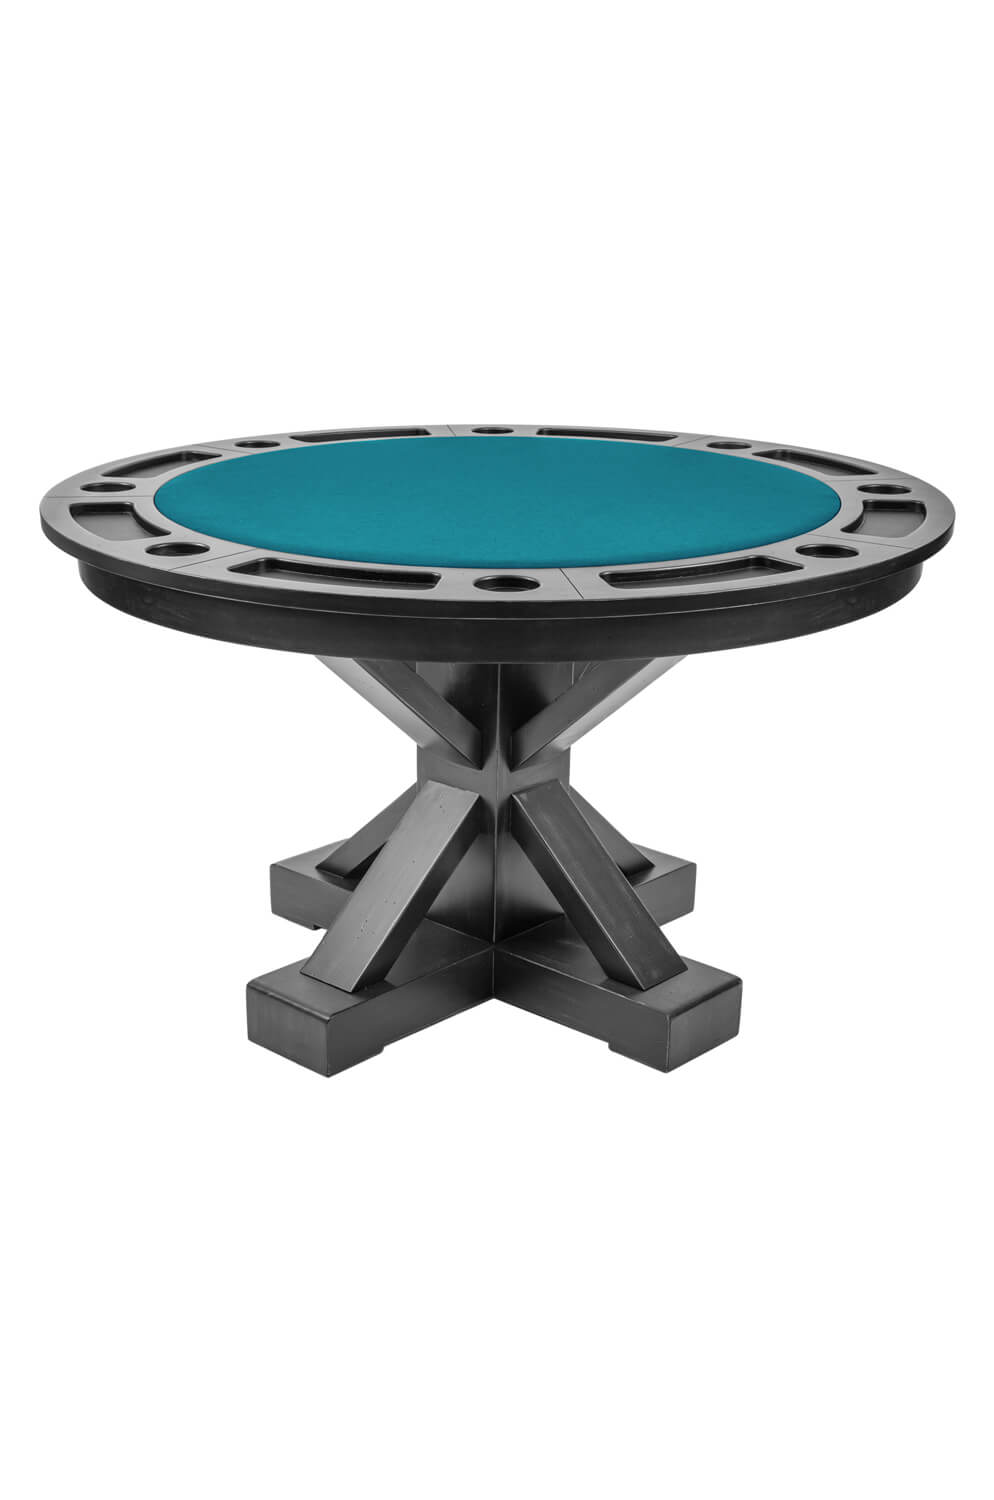 Buy Trestle 8-Player Convertible Poker Dining Table